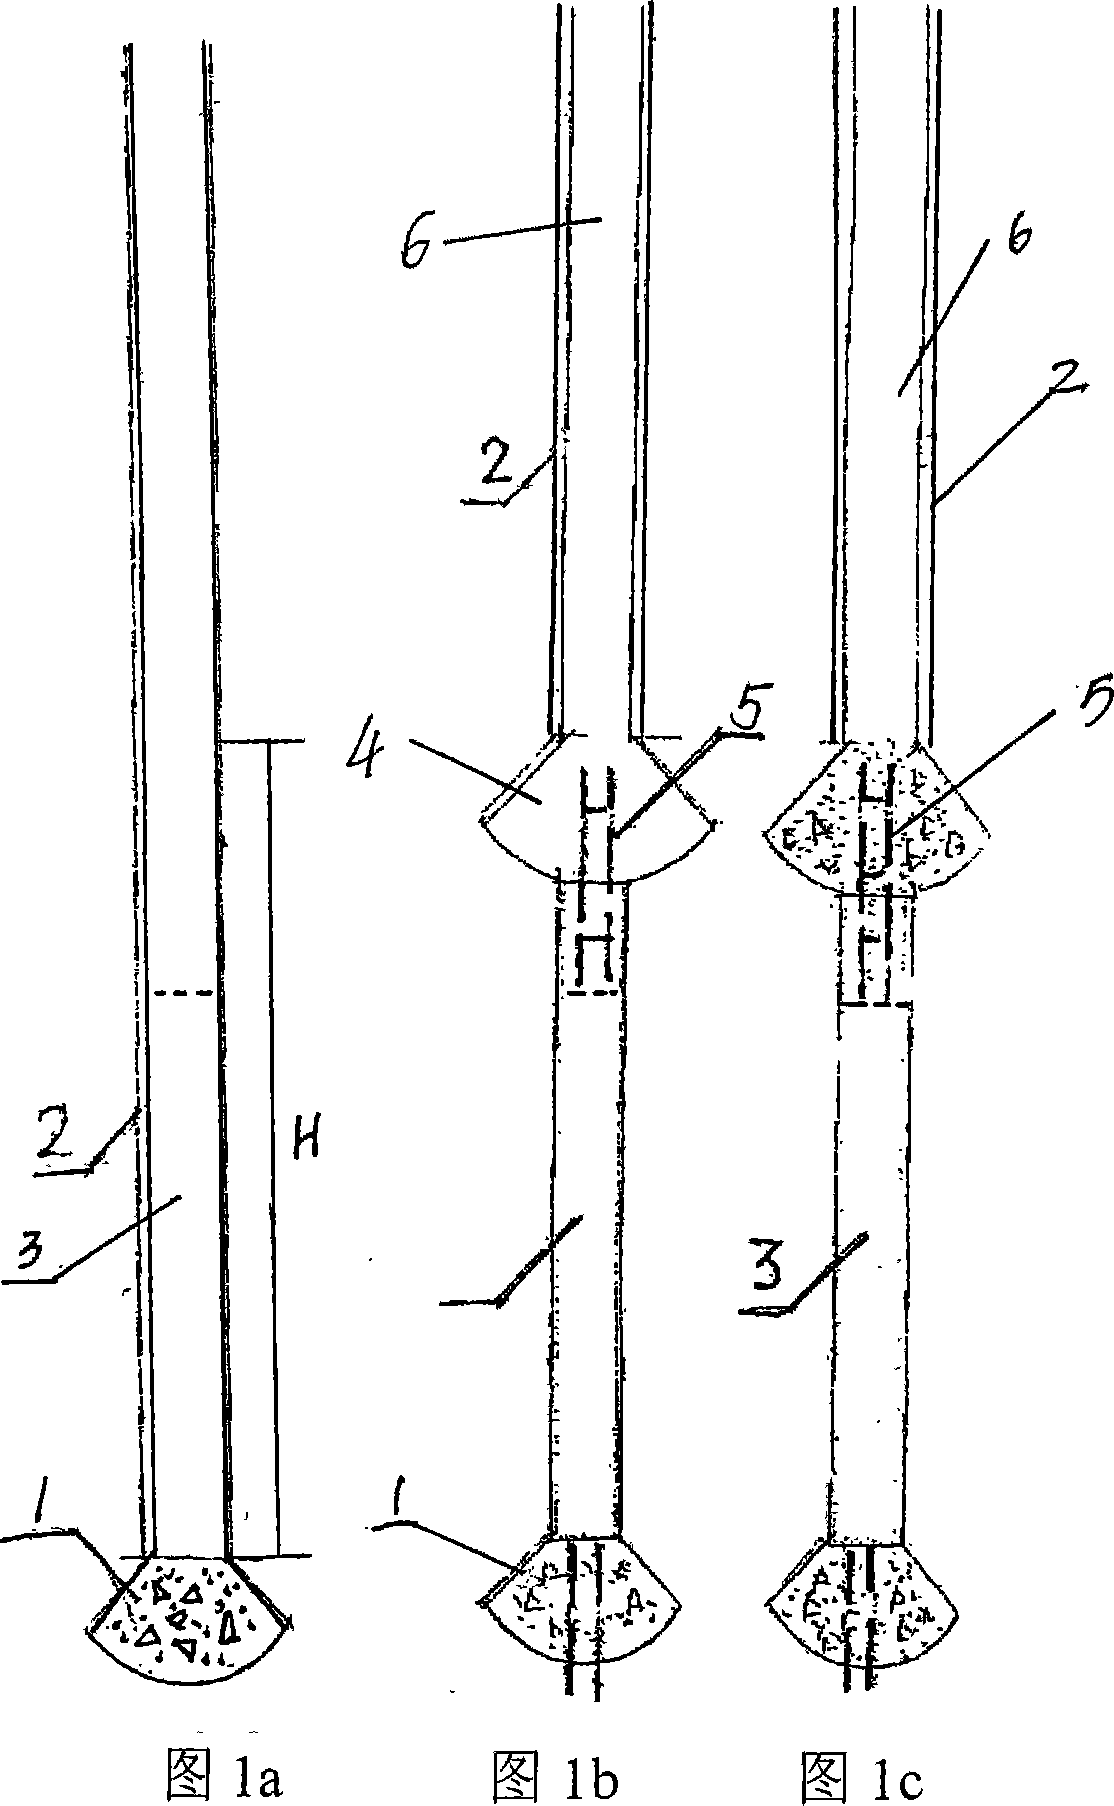 Pile forming method for high-bearing two-stage bottom expanding prefabricated pile body